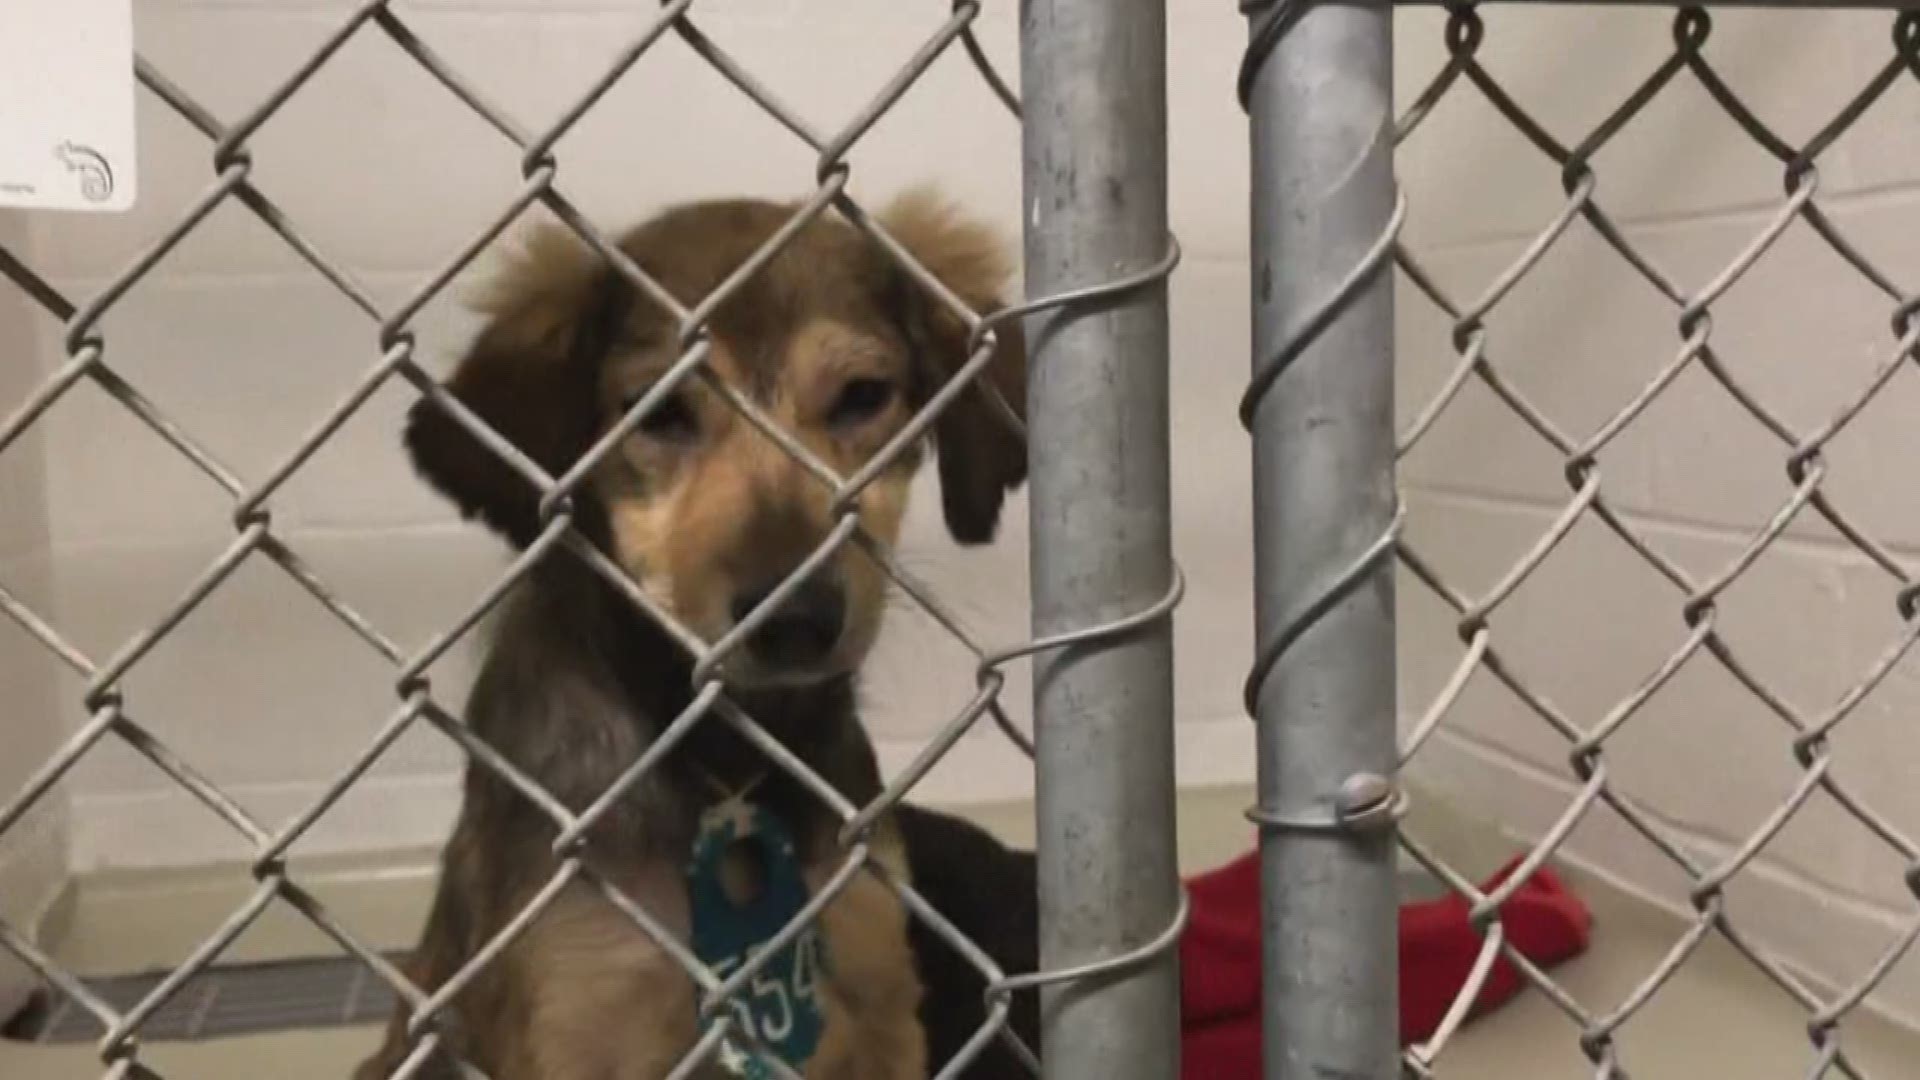 The Harris County Animal Shelter took in 59 puppies in just one hour on Thursday and volunteers are asking for the public's help in adopting or fostering the animals.